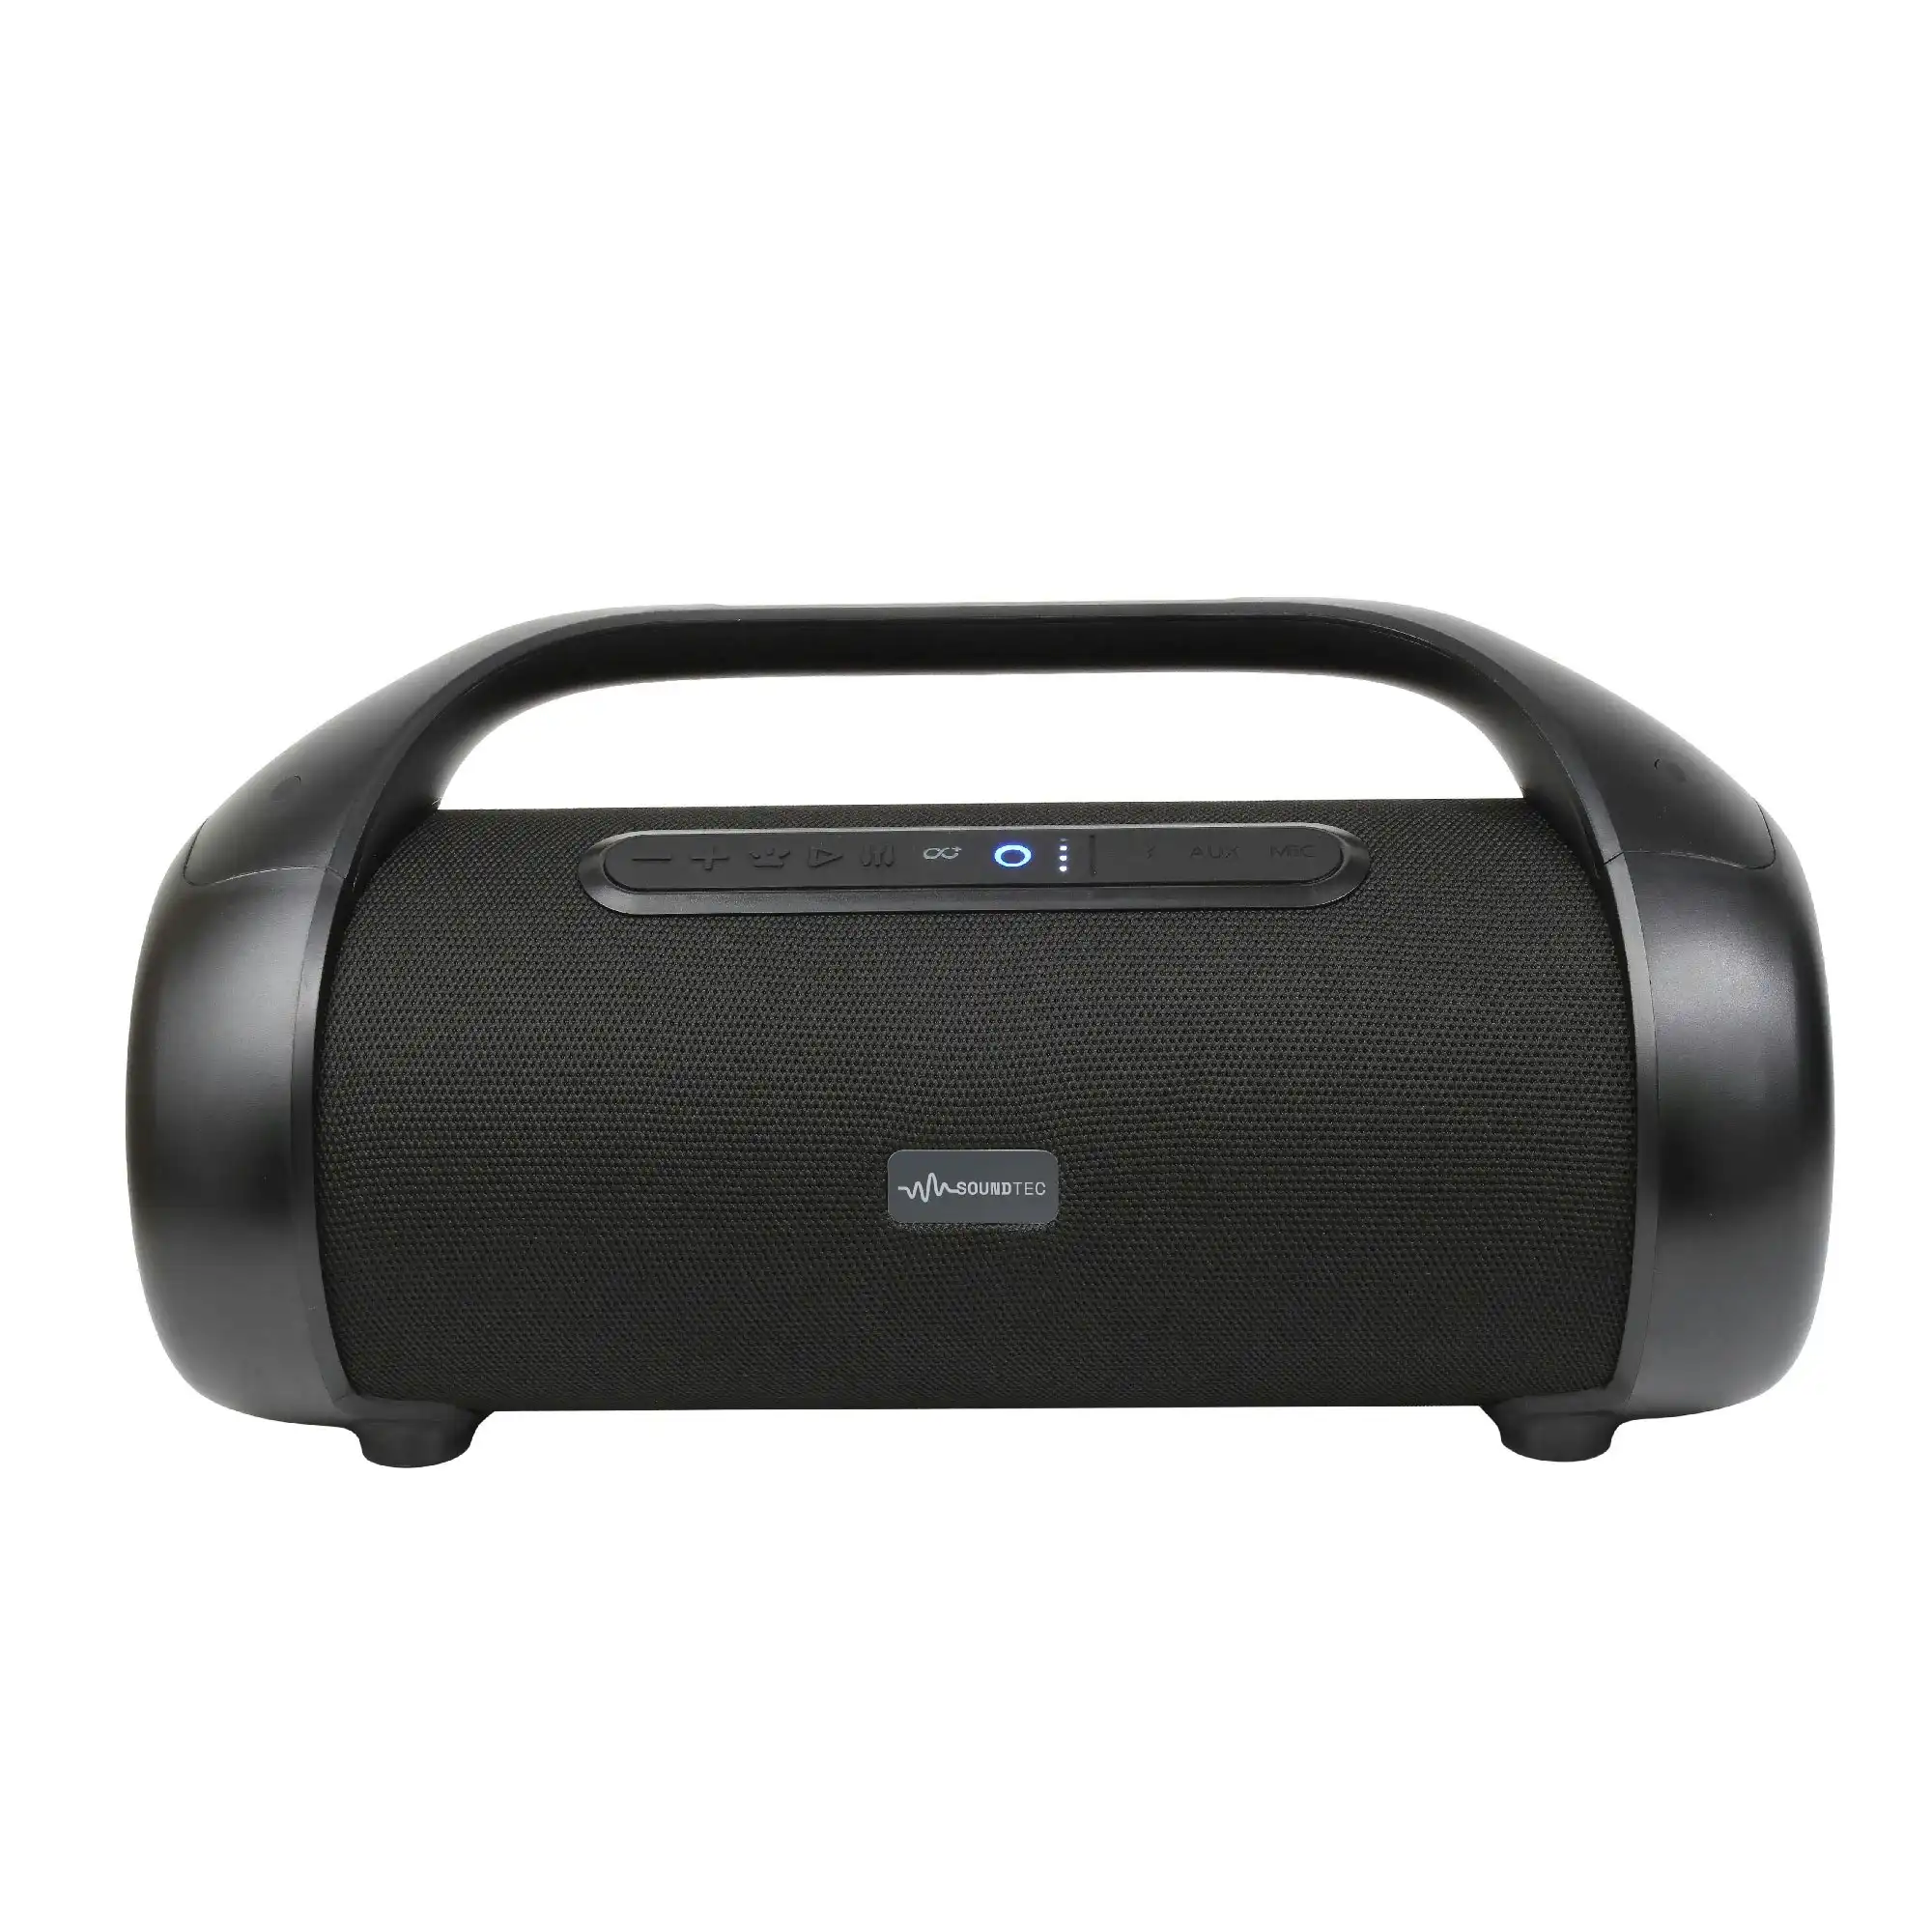 SoundTec 2.1 CH Superb Boombox Outdoor Portable Wireless Bluetooth Speaker IPX5